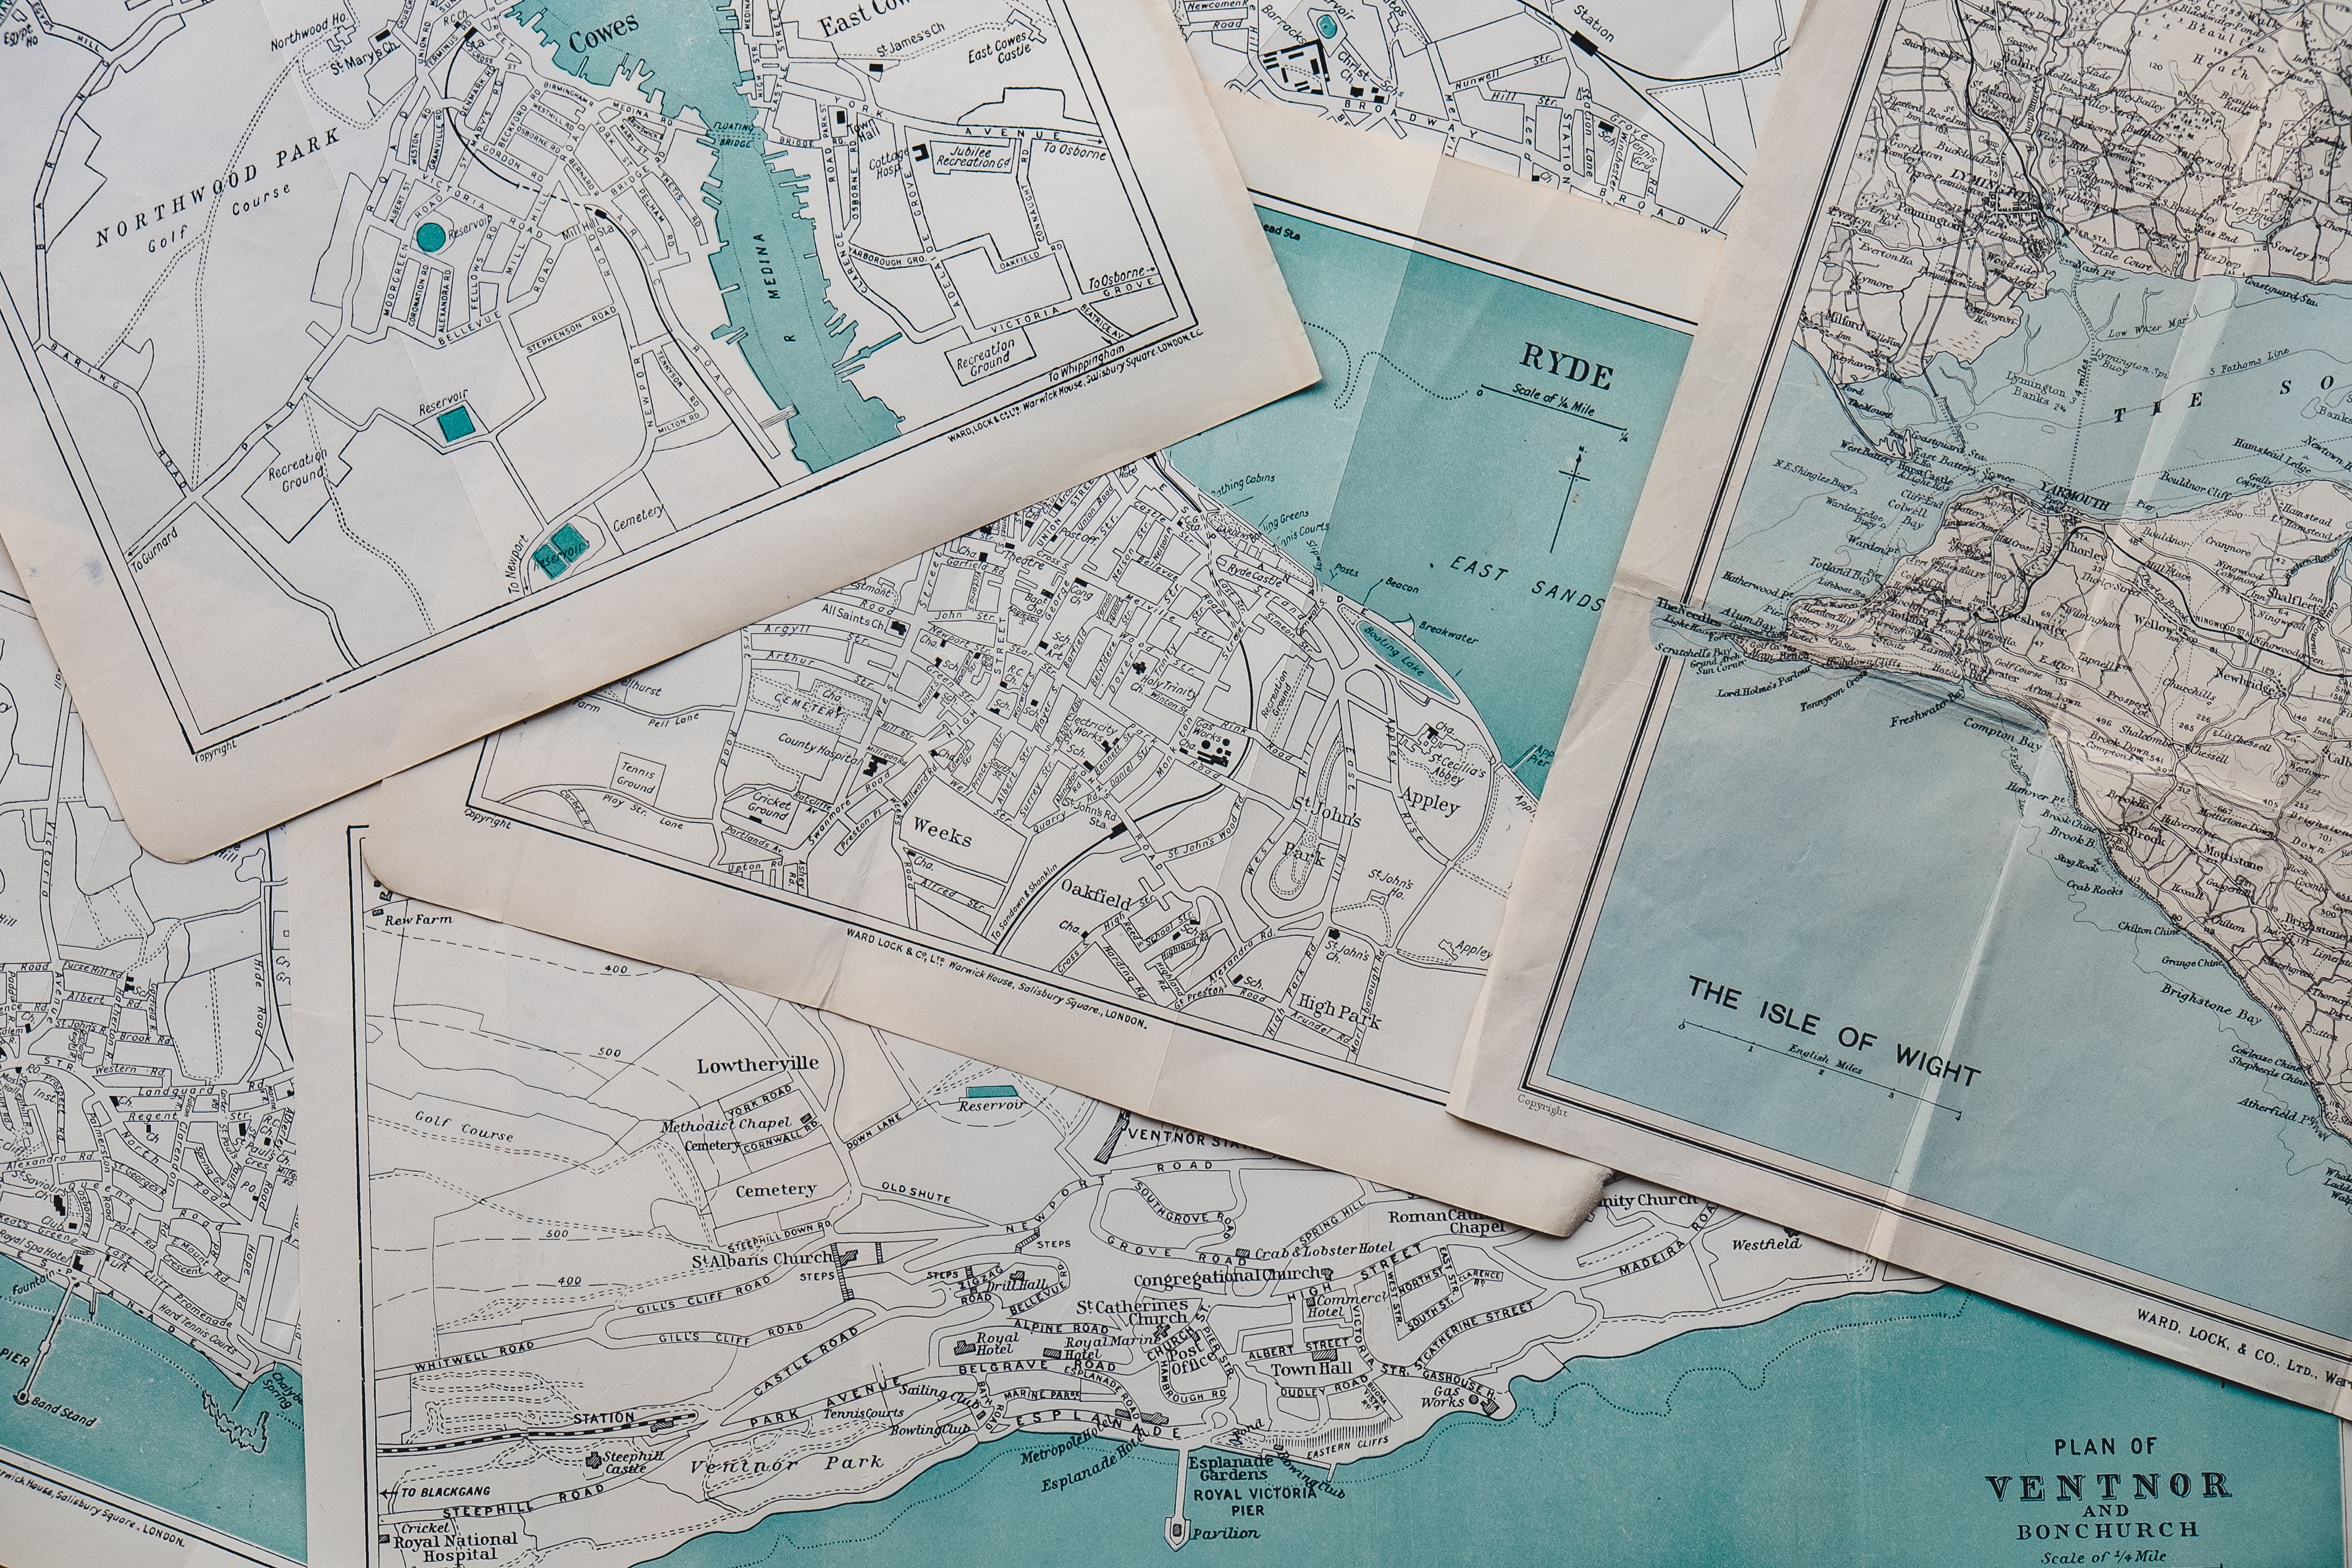 Image description: several paper maps showing roads, bodies of water, and place names for different geographical areas. Photo credit to Annie Spratt of Unsplash.